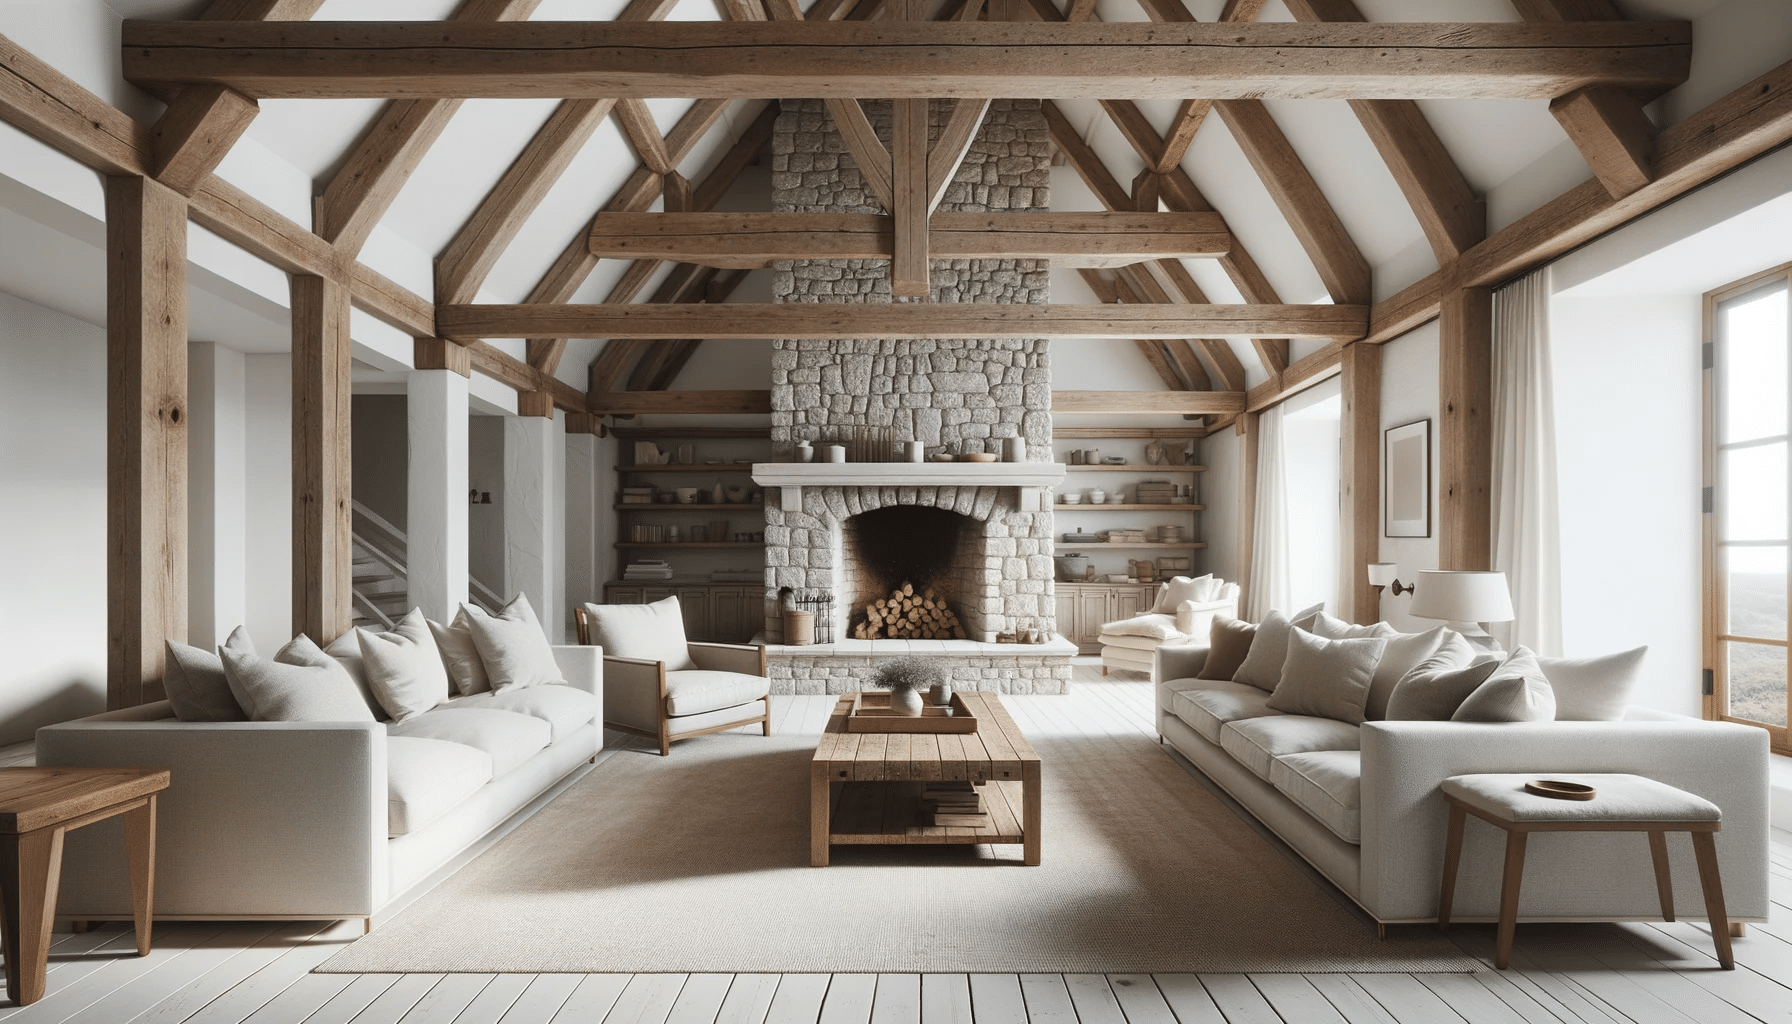 Spacious living room with exposed wooden beams. Tall ceilings and fireplace!